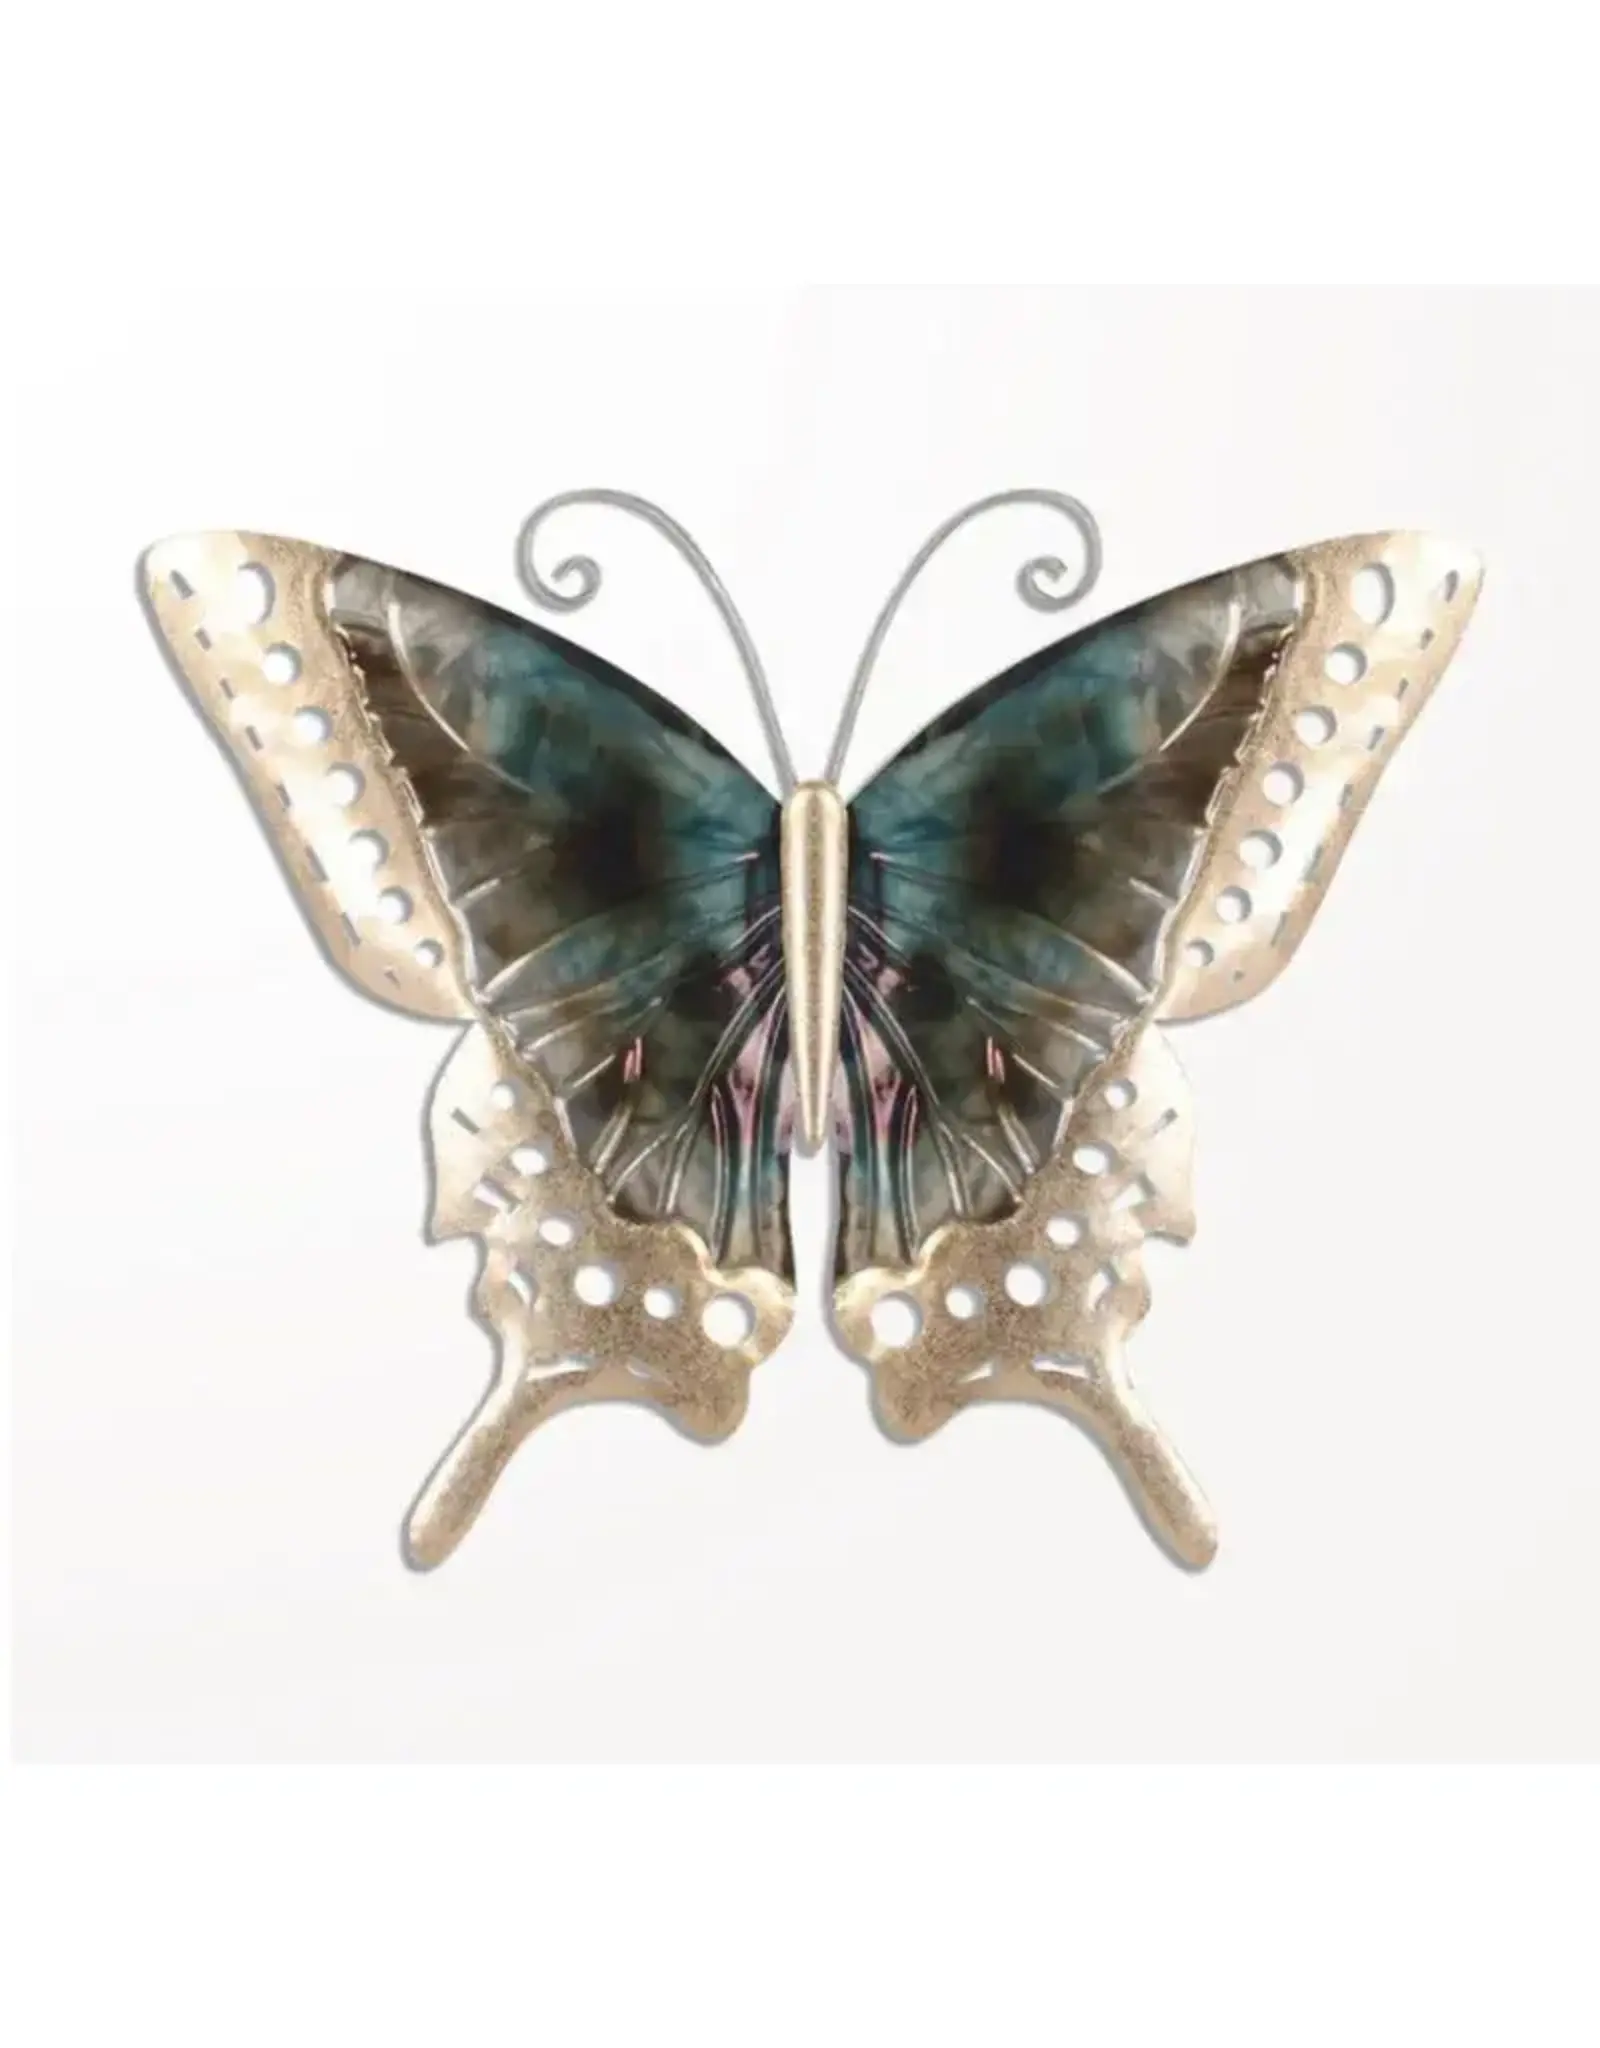 Panam Decor & Gifts PUI37253 Large Aqua Butterfly Metal Wall Decor